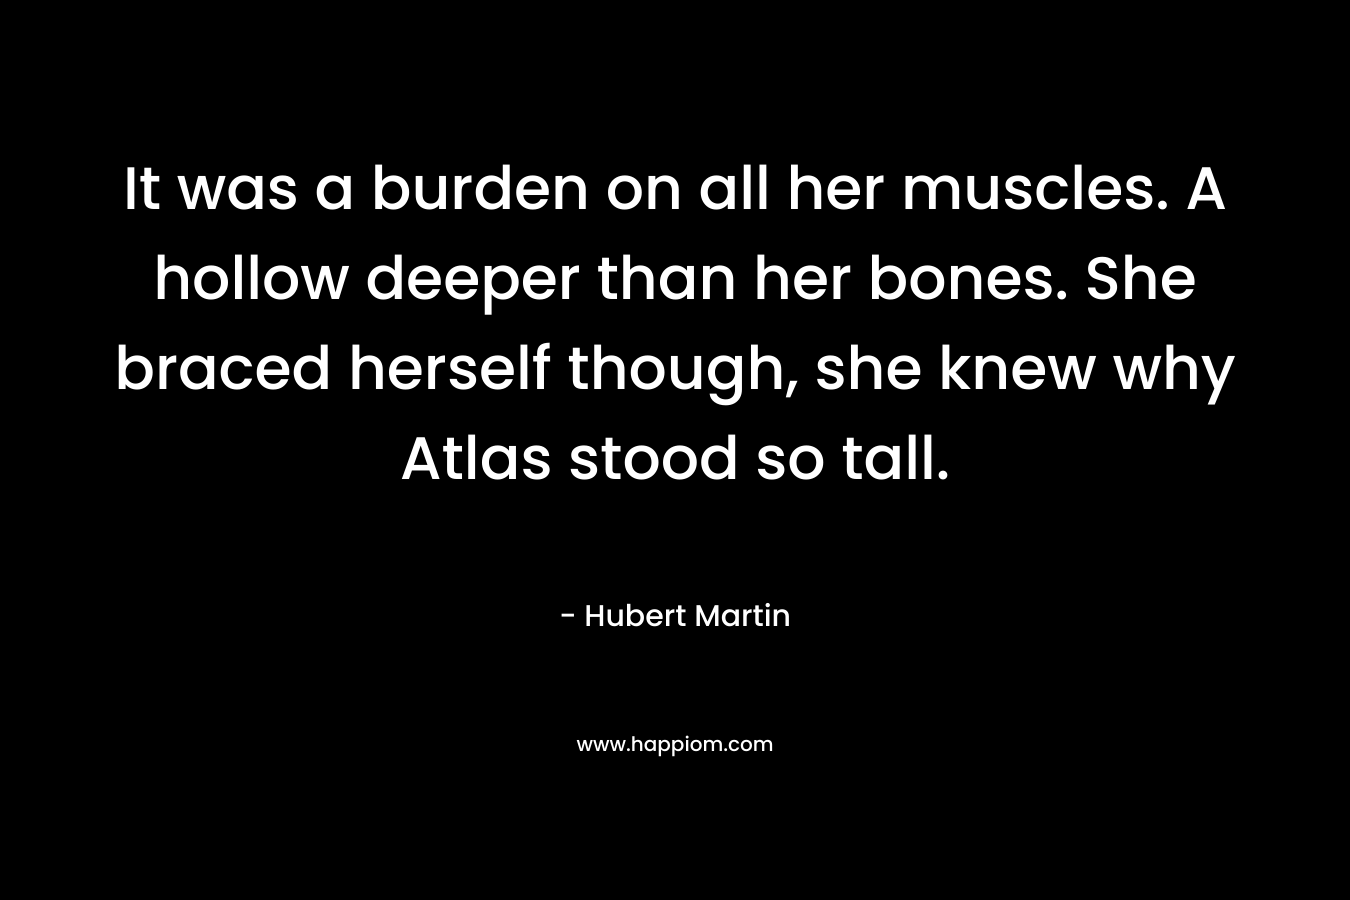 It was a burden on all her muscles. A hollow deeper than her bones. She braced herself though, she knew why Atlas stood so tall.